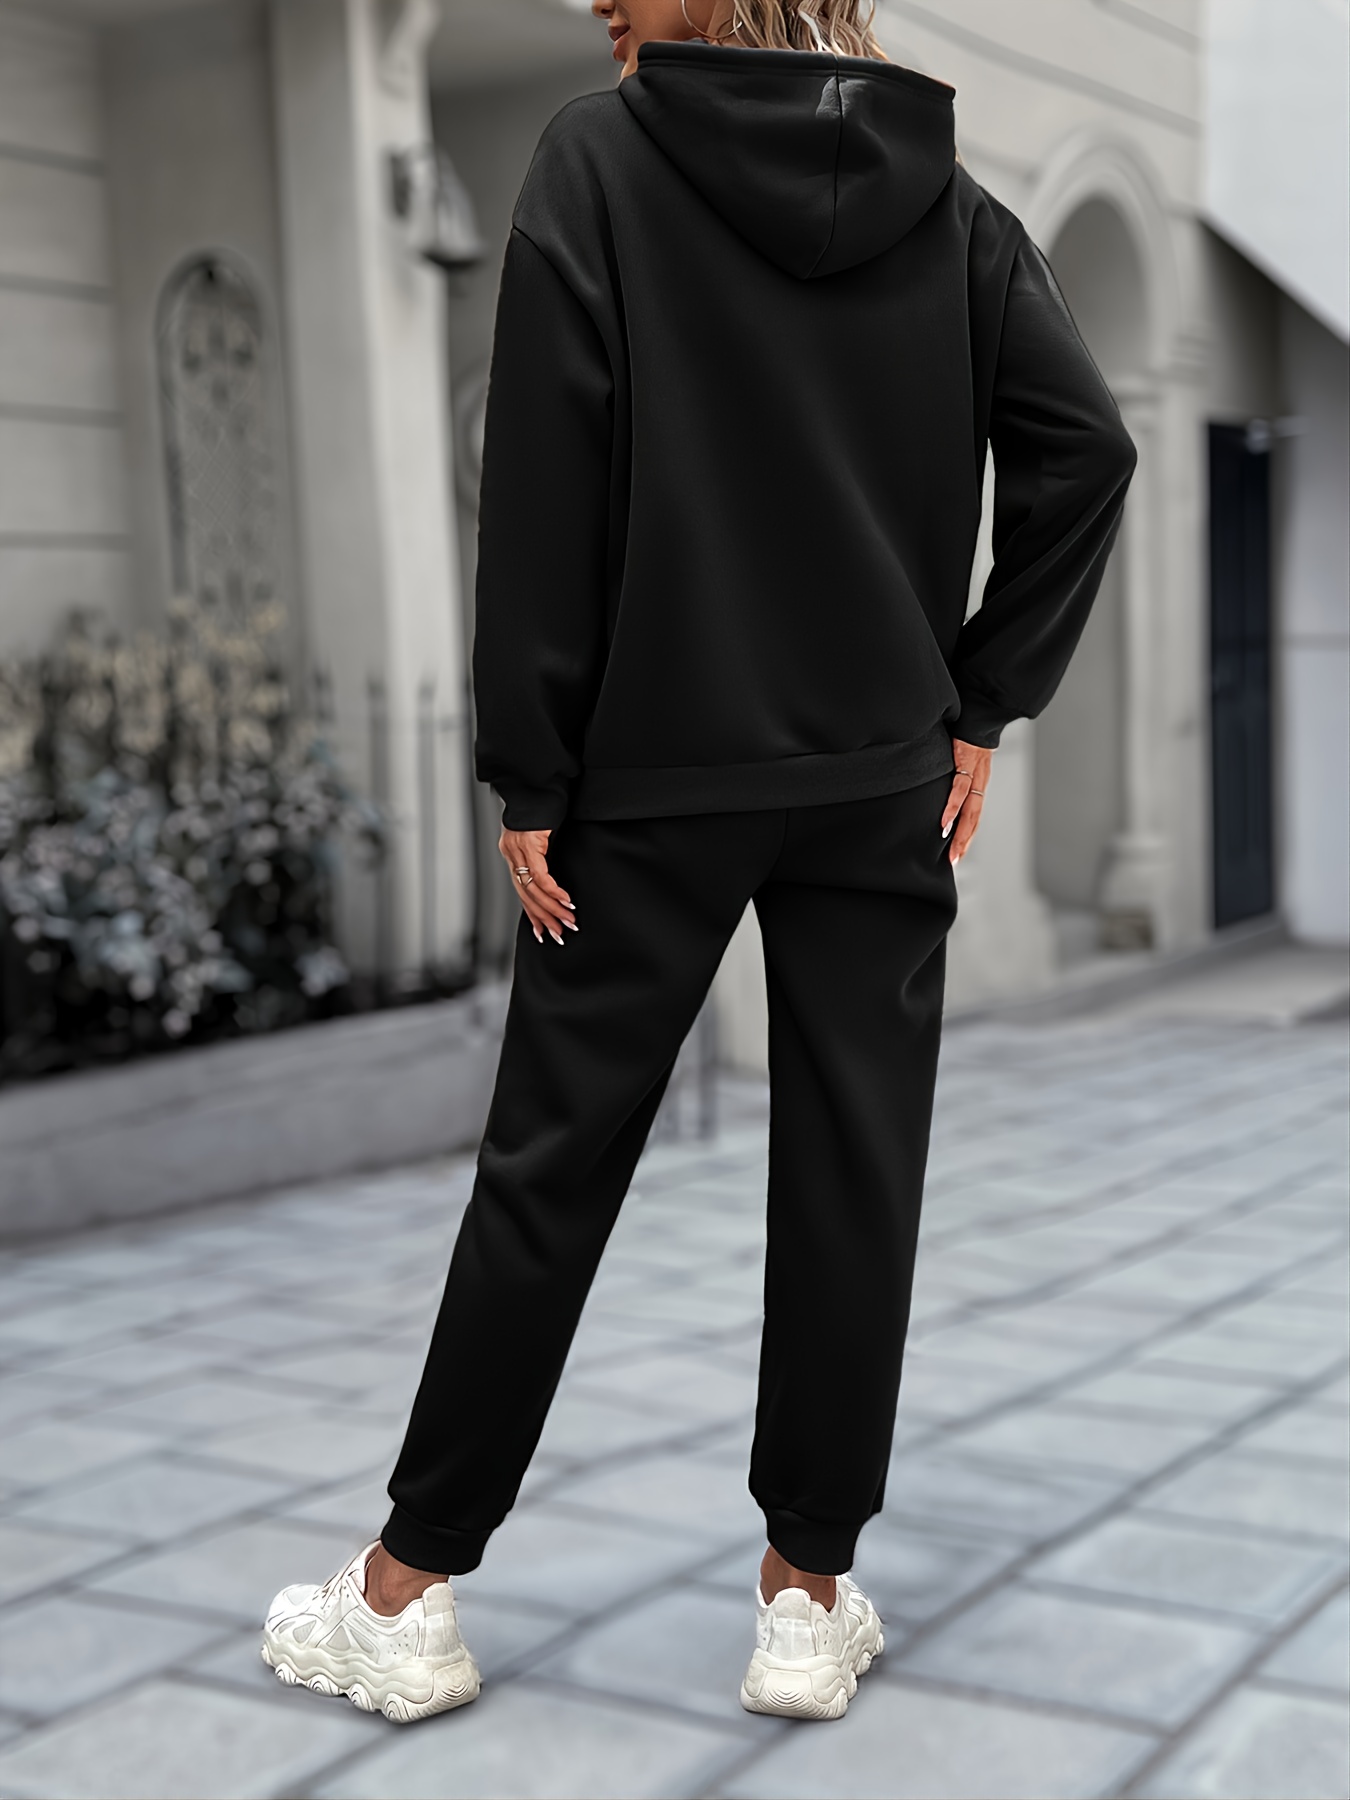 Women's Tracksuit Two Piece Sets Loose Long Sleeve Shirt Tops And W